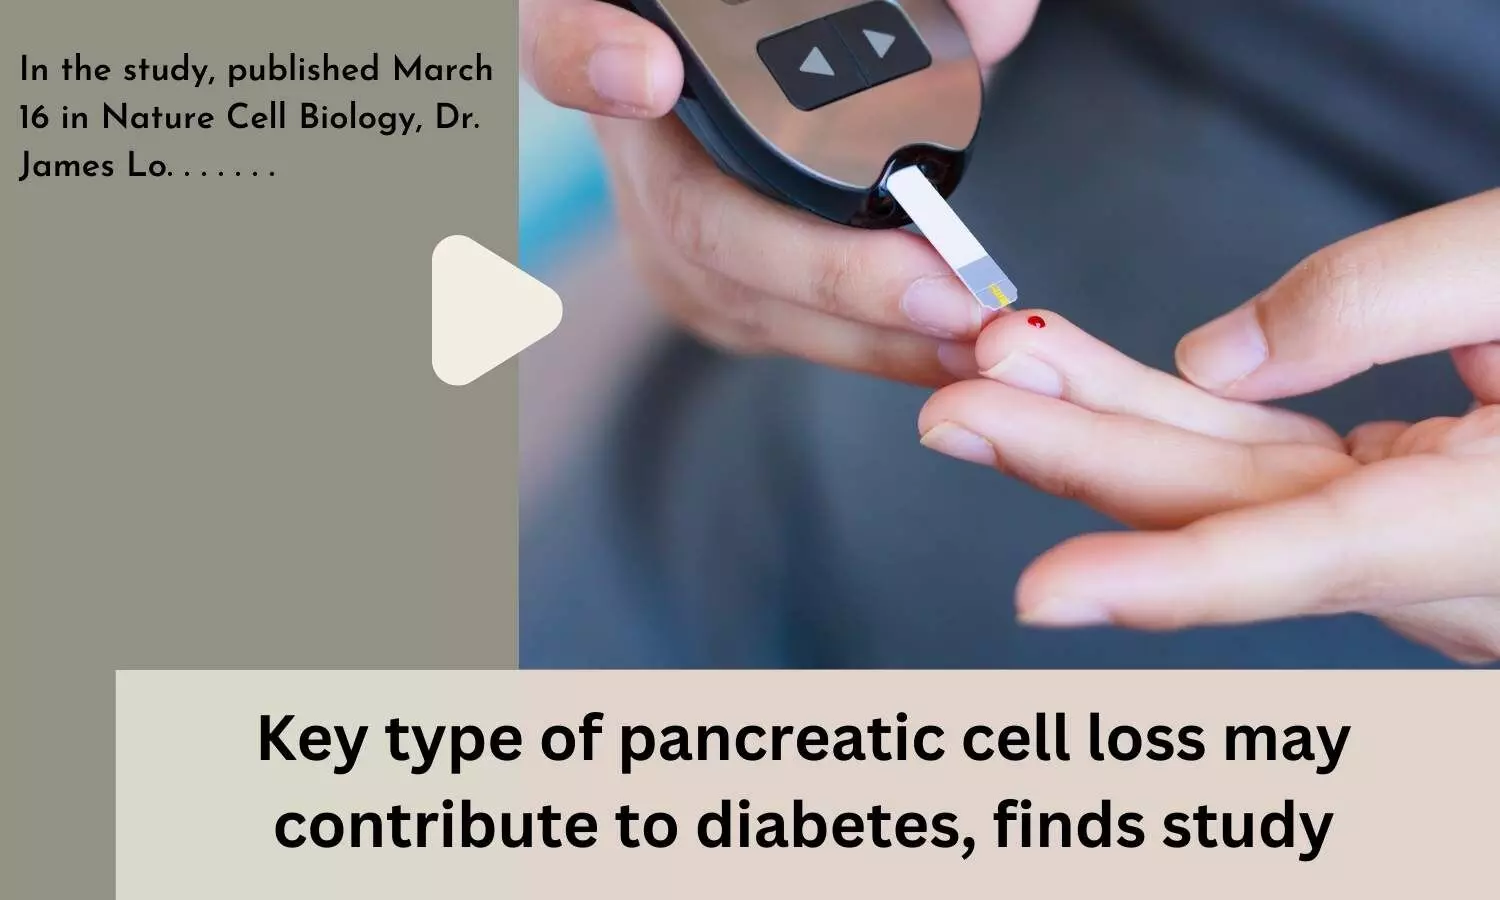 Key type of pancreatic cell loss may contribute to diabetes, finds study